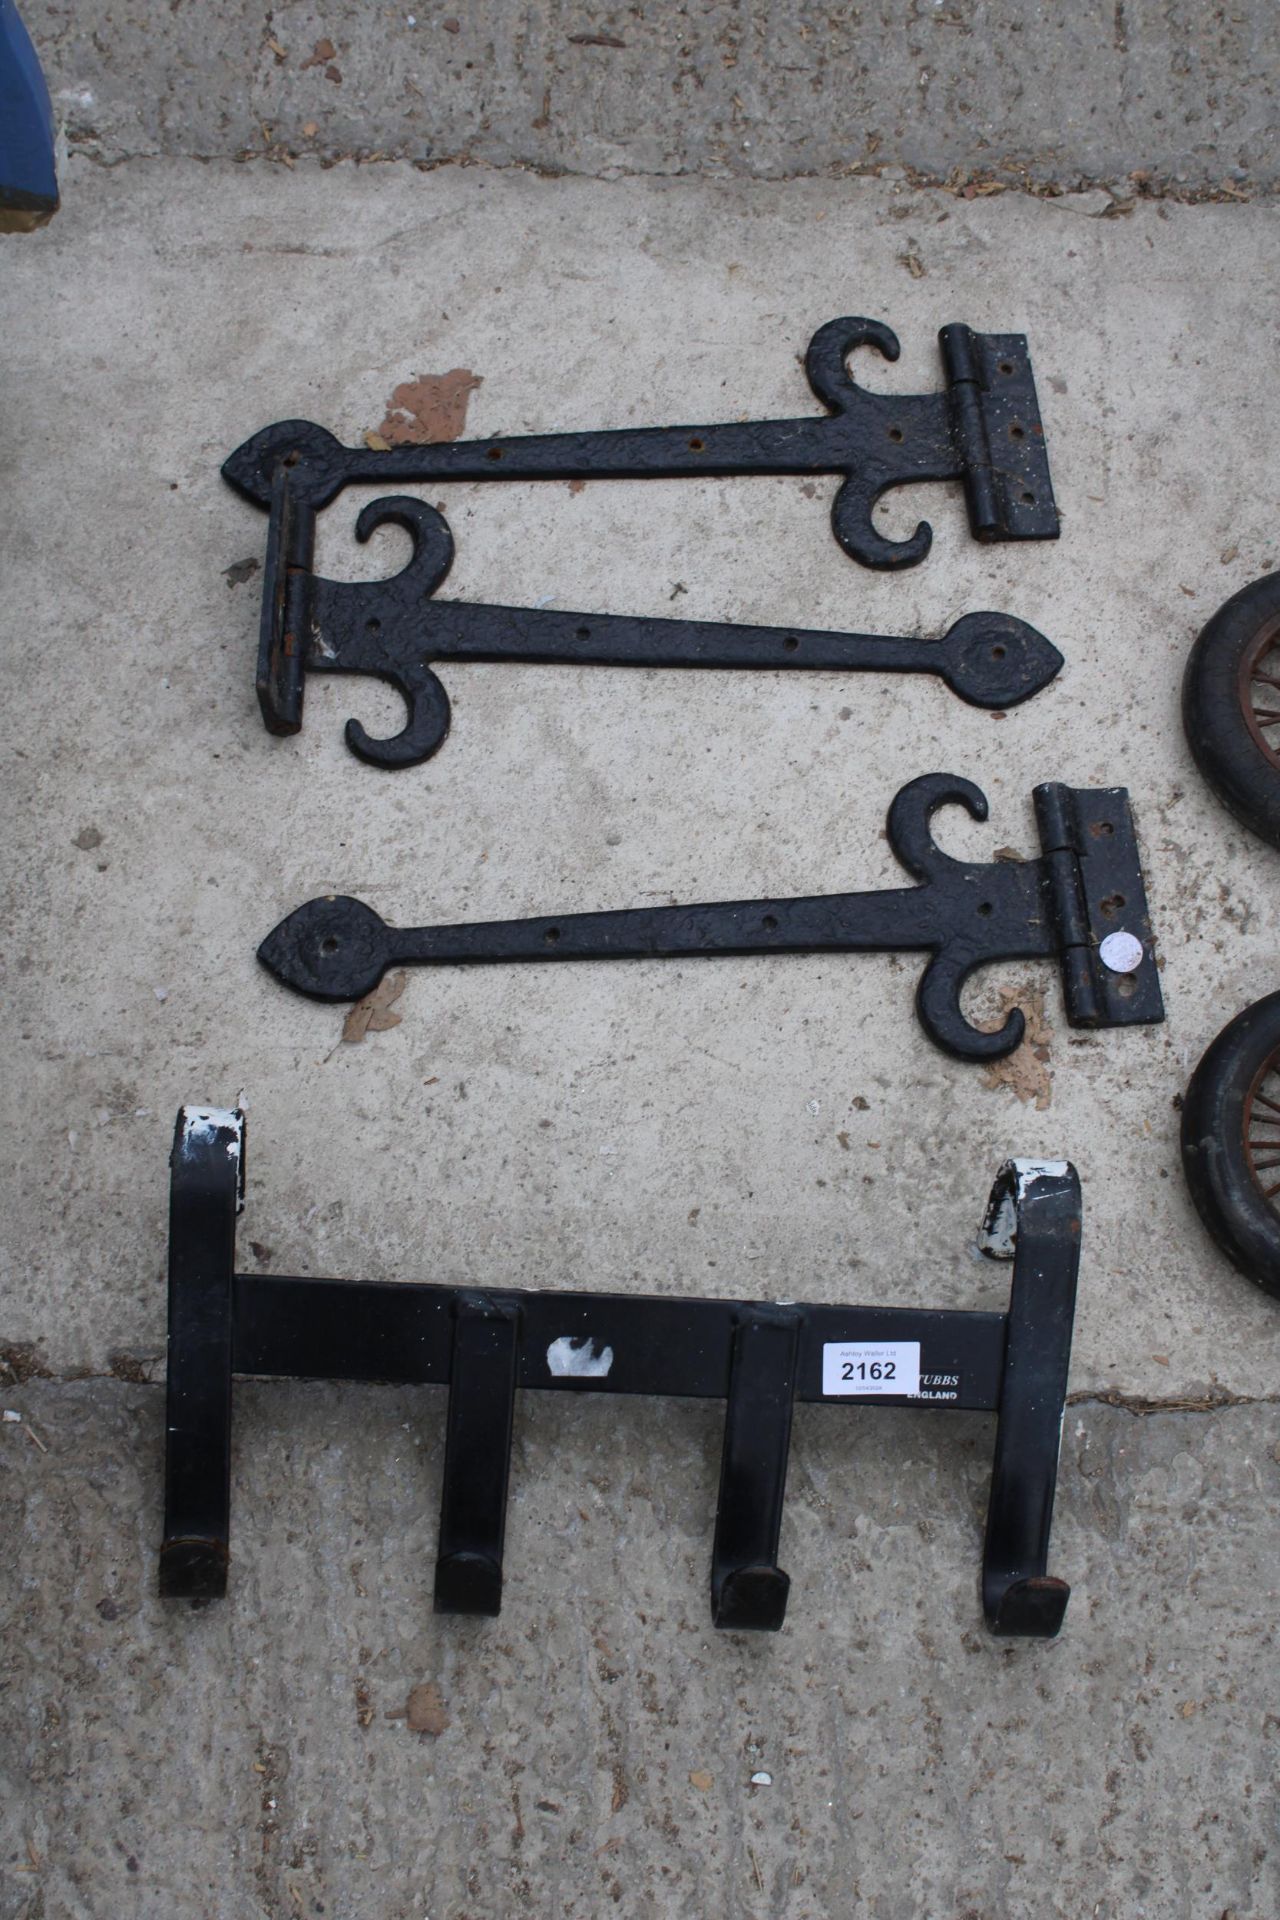 THREE HEAVY METAL GATE HINGES AND A COAT HOOK